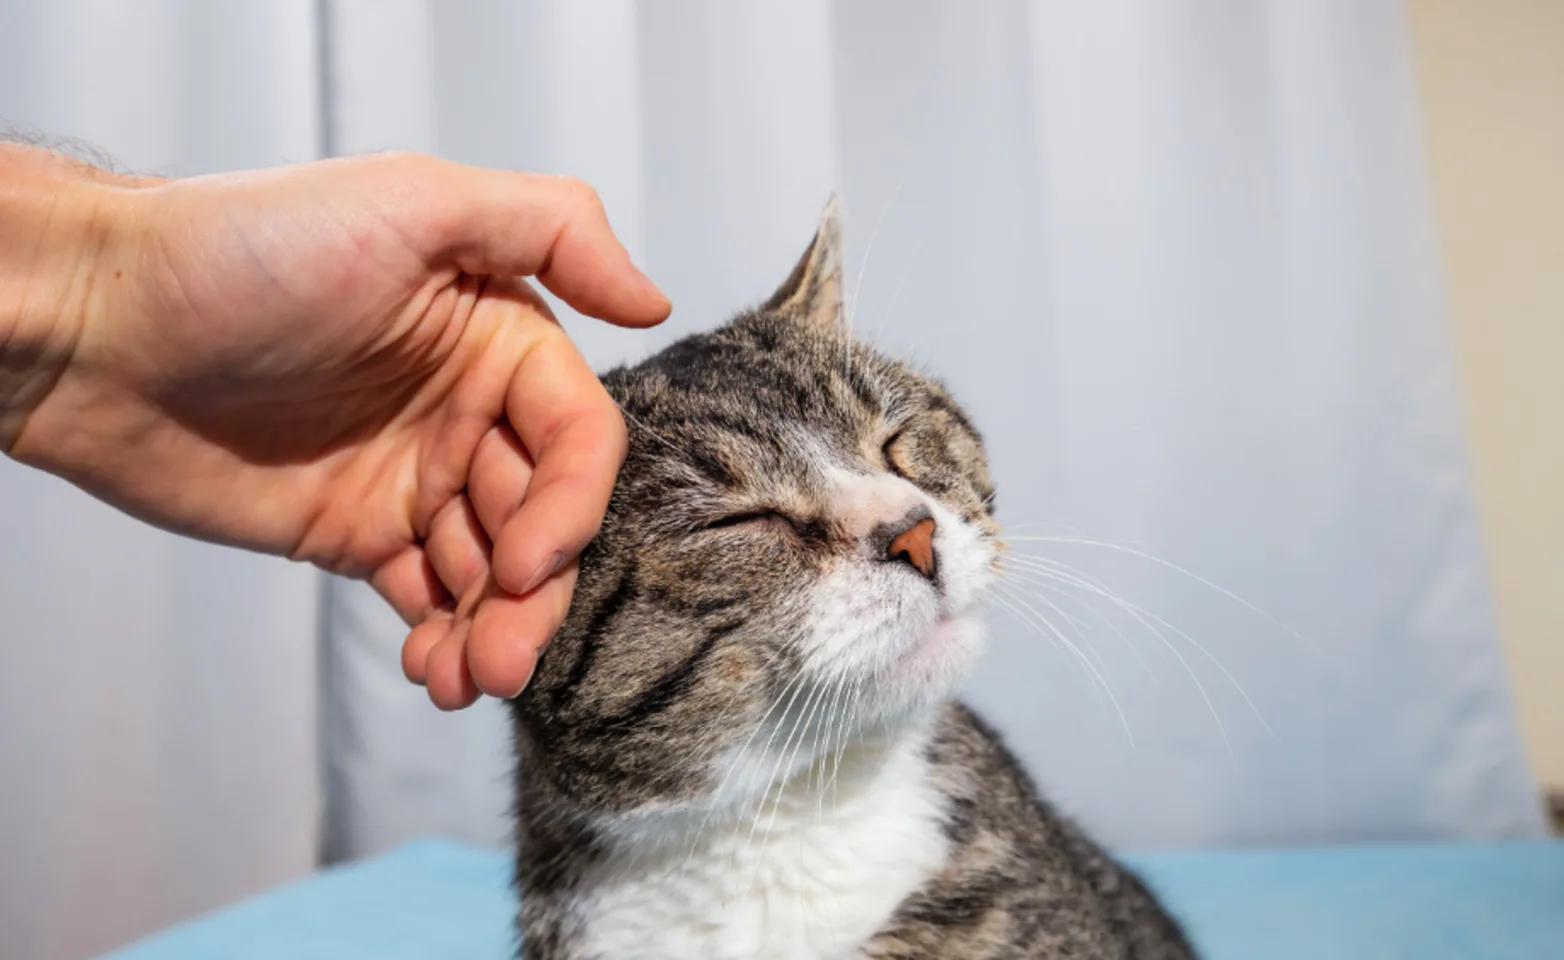 Hand petting cat with its eyes closed